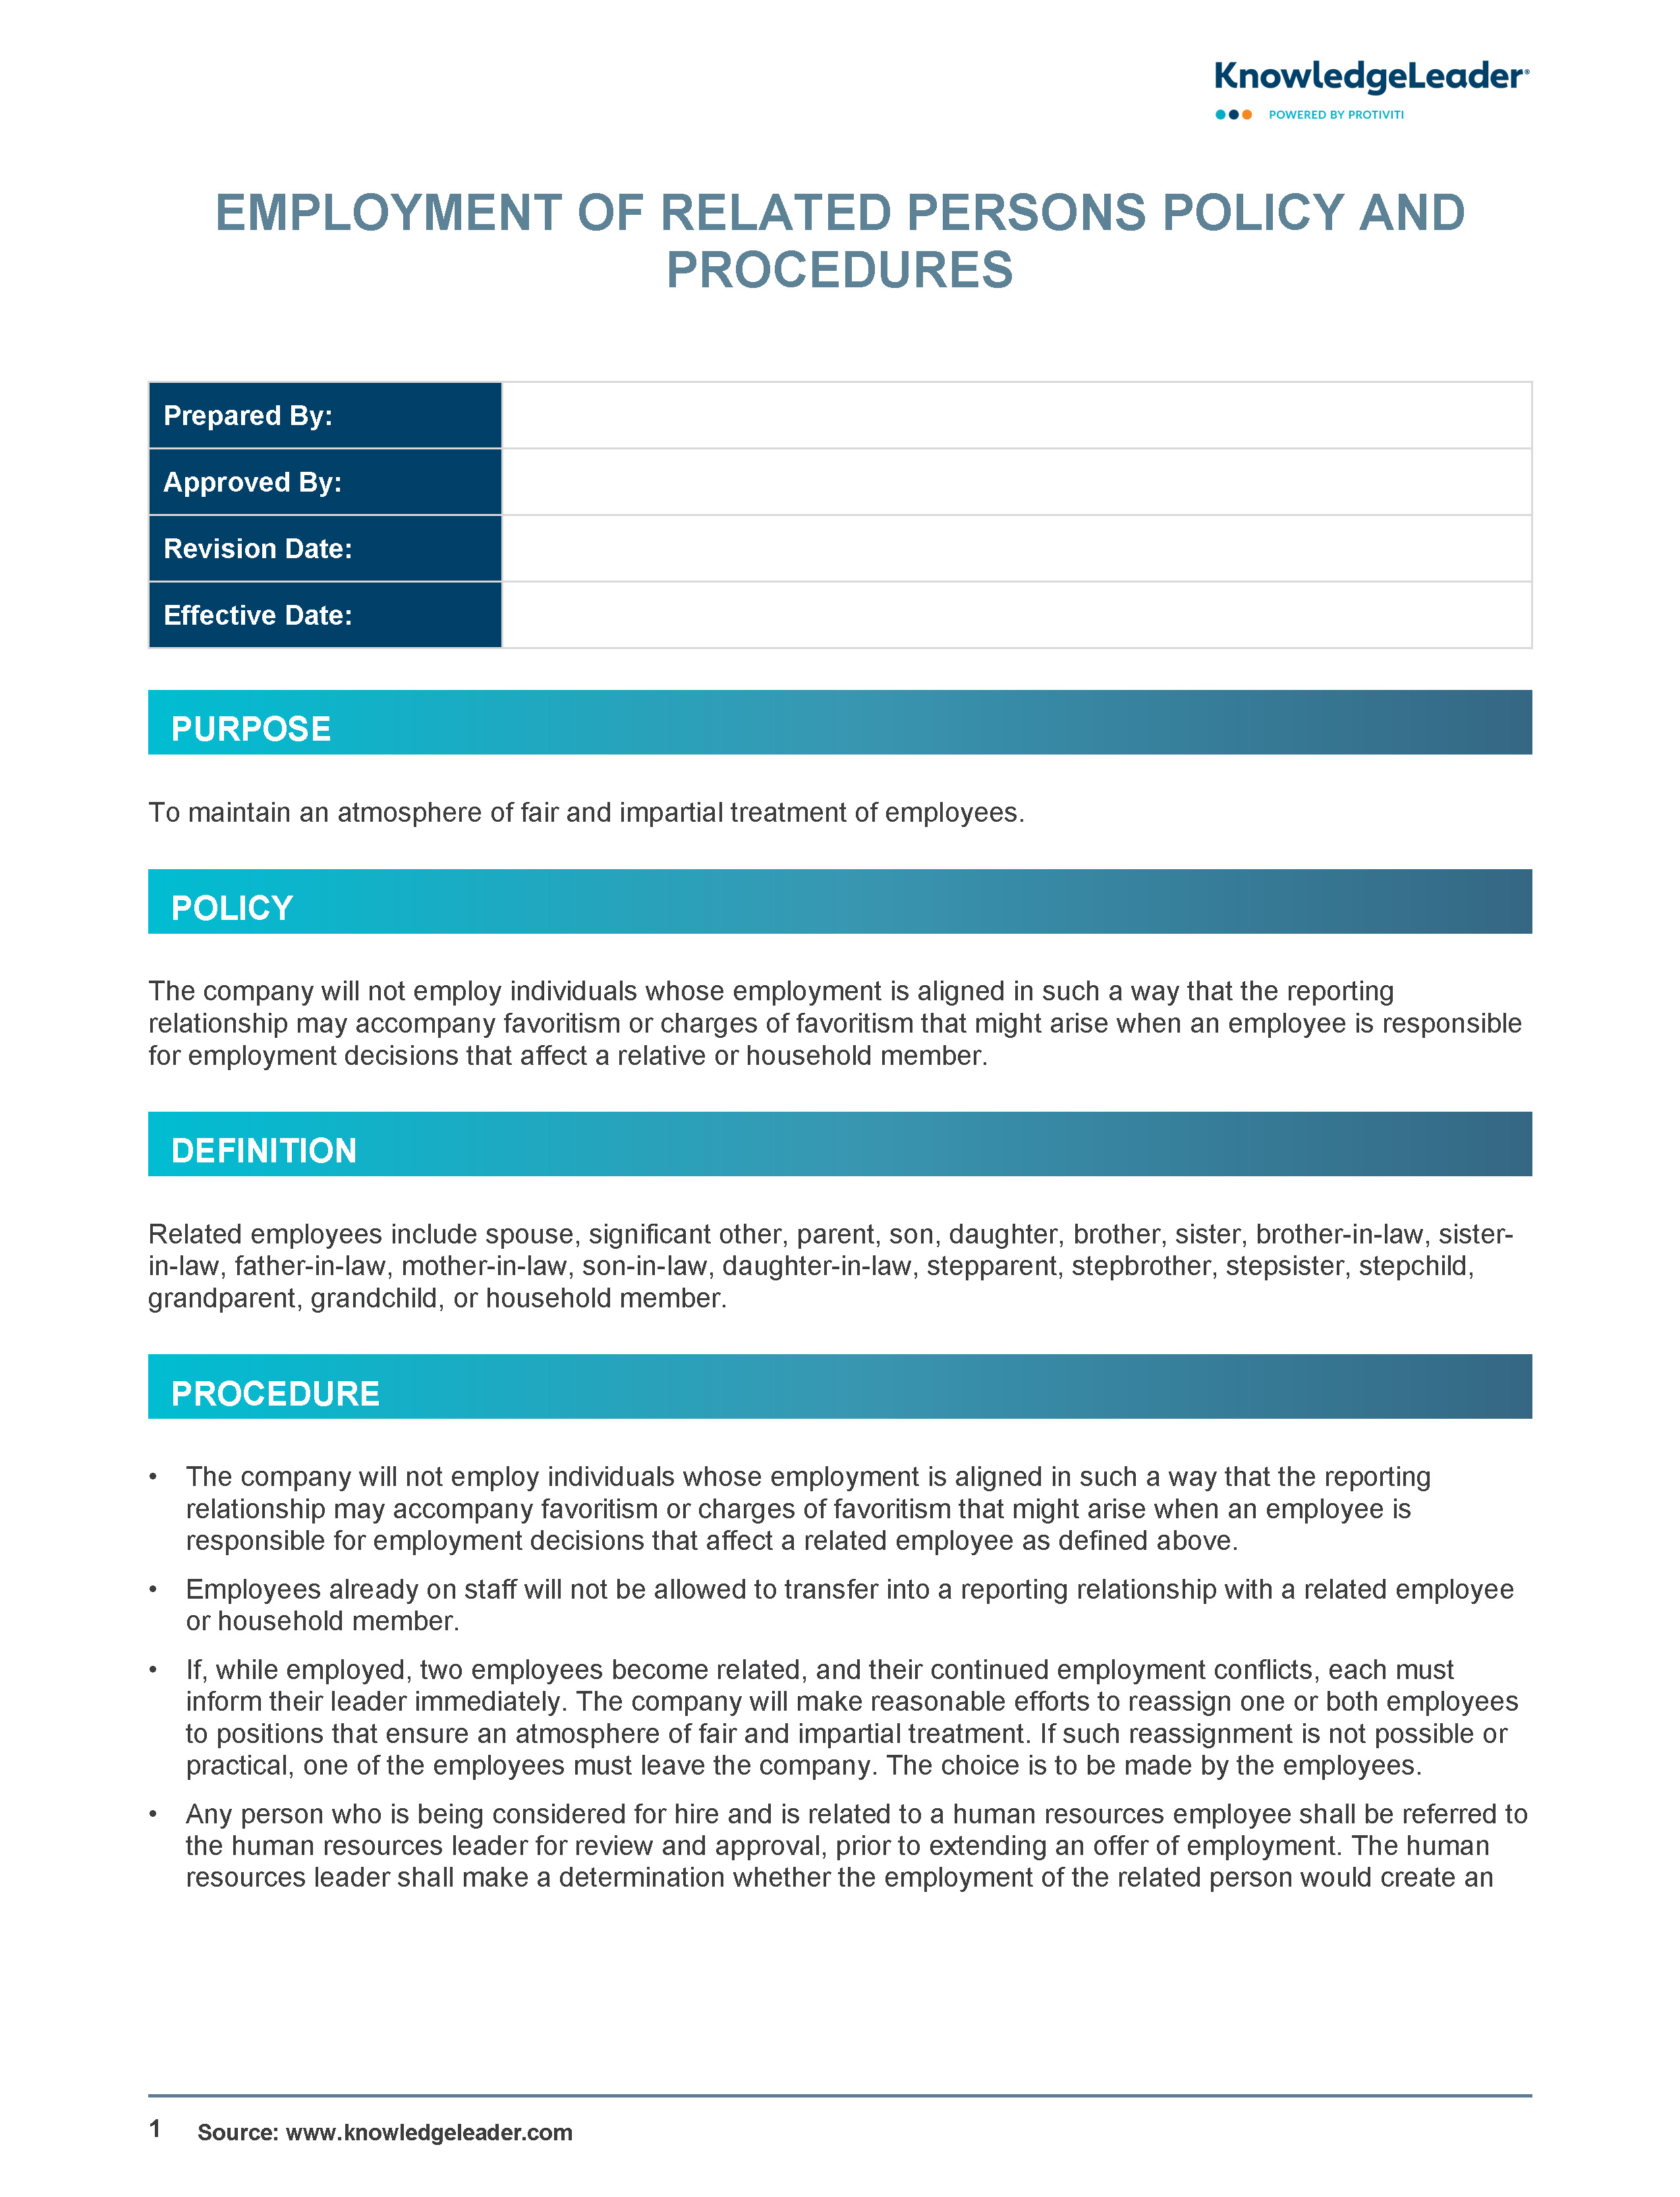 Screenshot of the first page of Employment of Related Persons Policy and Procedures